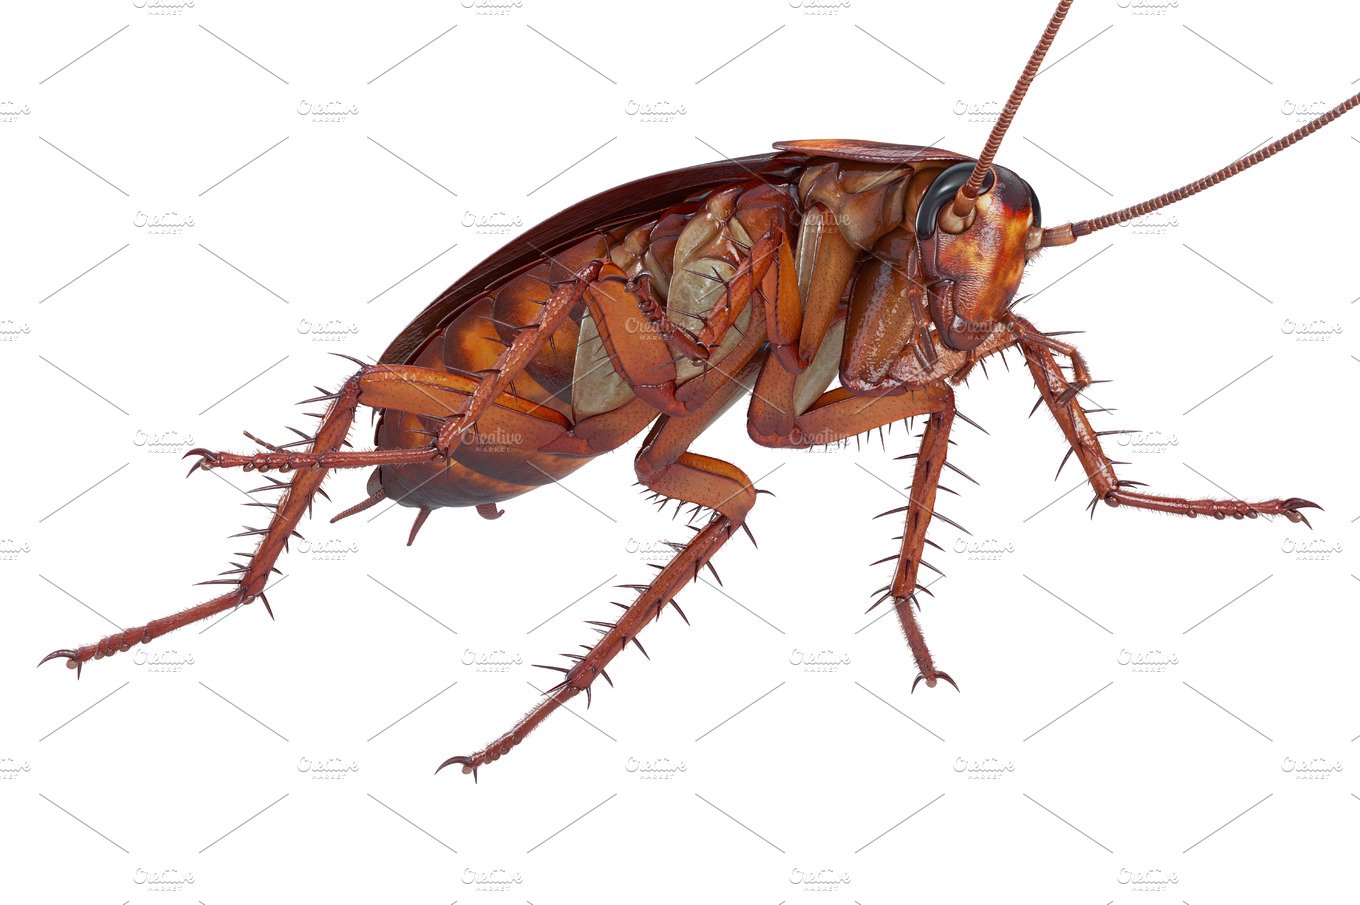 Cockroach bug creature cover image.